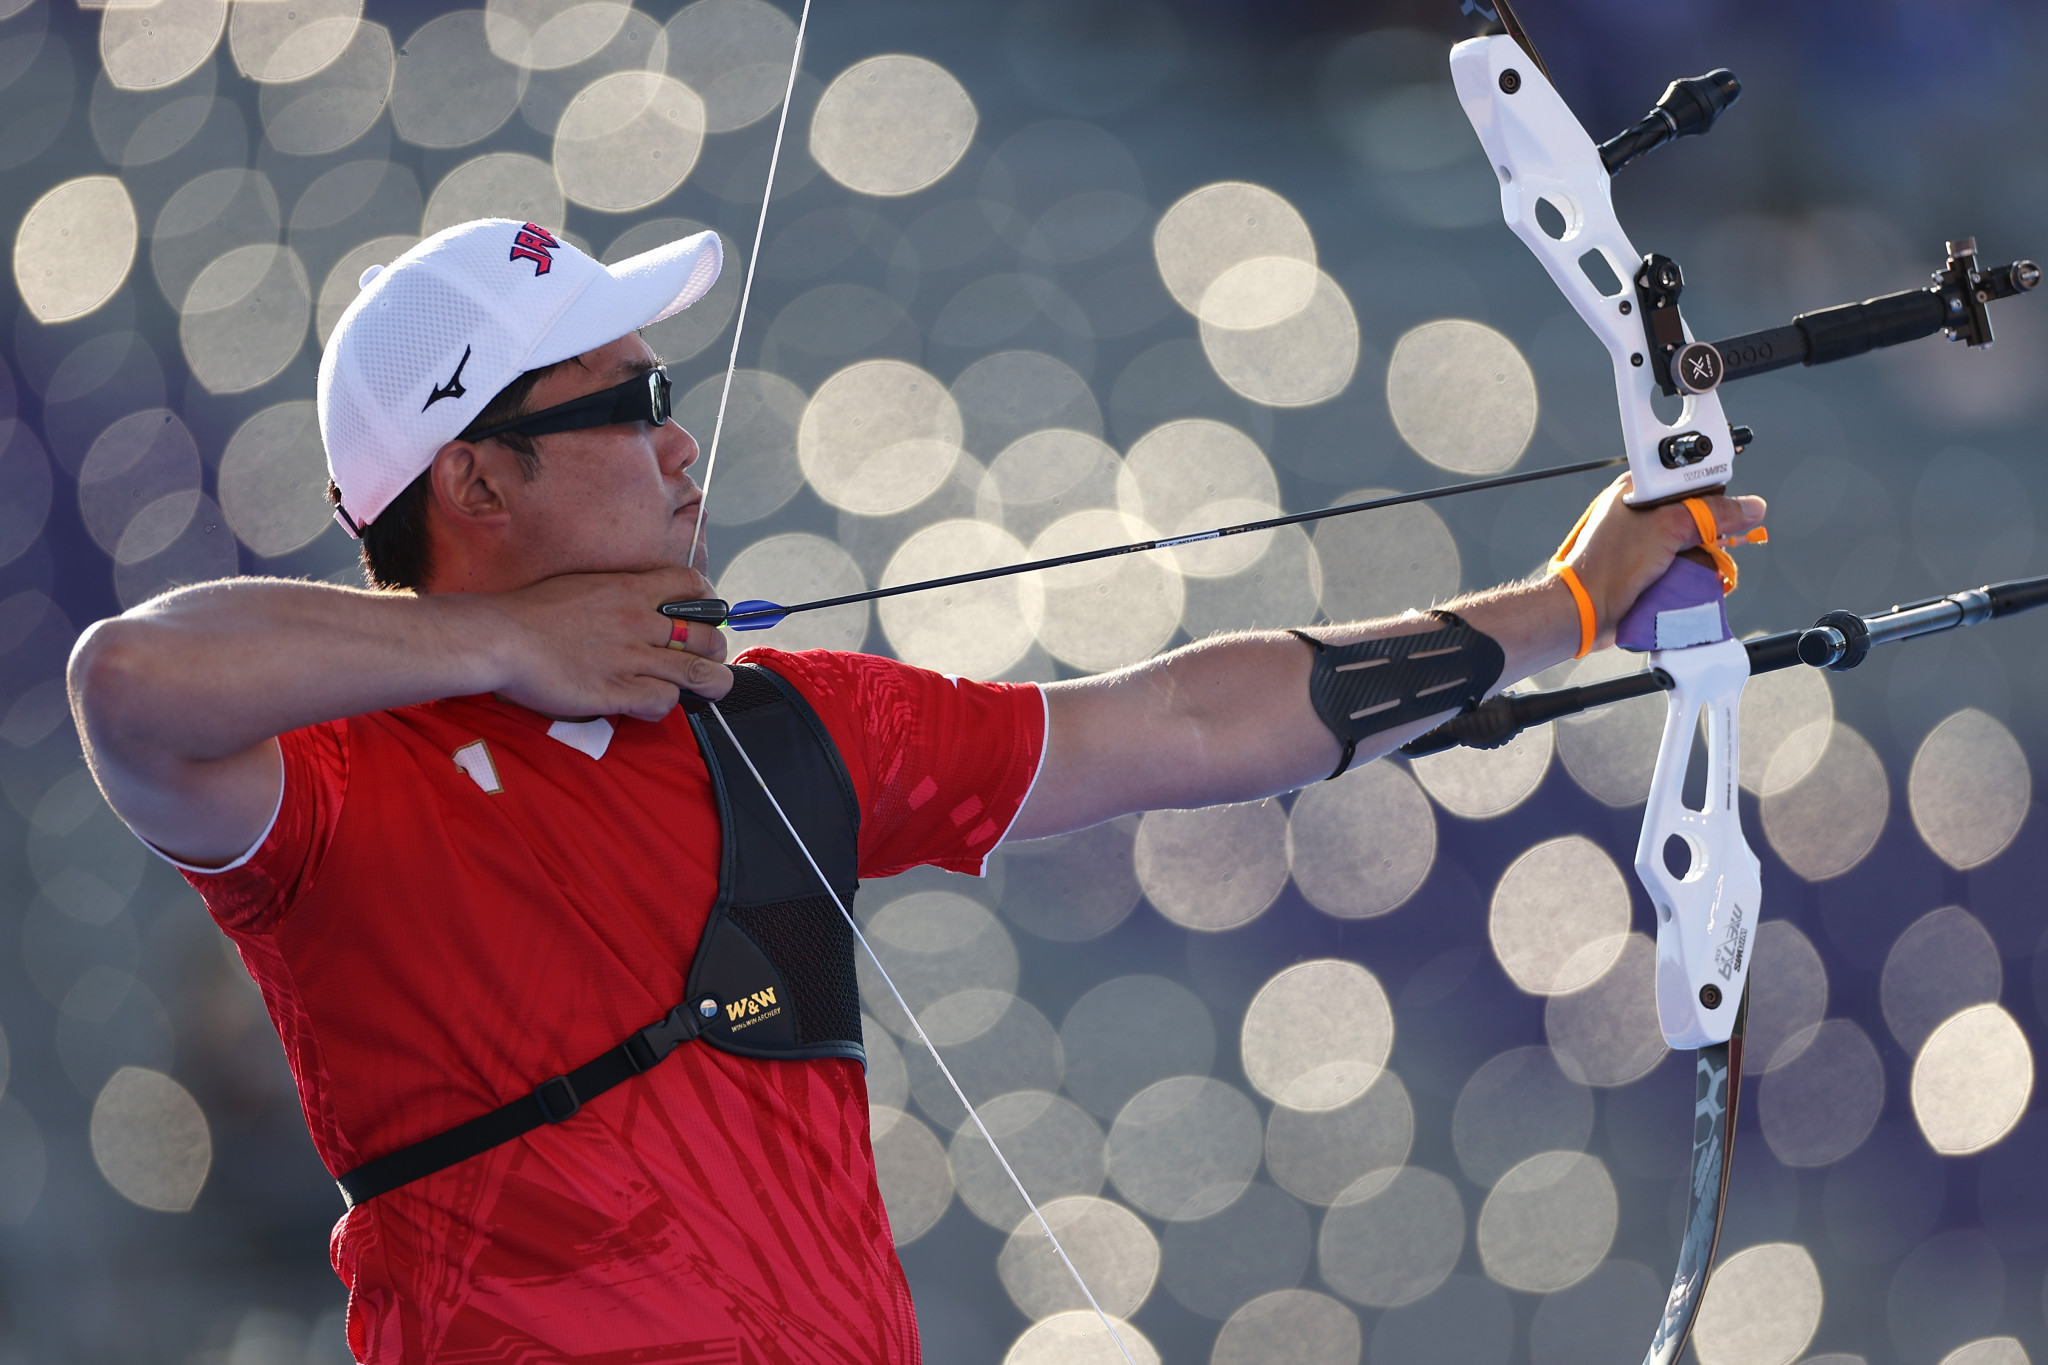 Takaharu Furukawa of Japan won gold alongside Tomomi Sugimoto in the inaugural Asian Games recurve mixed team competition in 2018 ©Getty Images